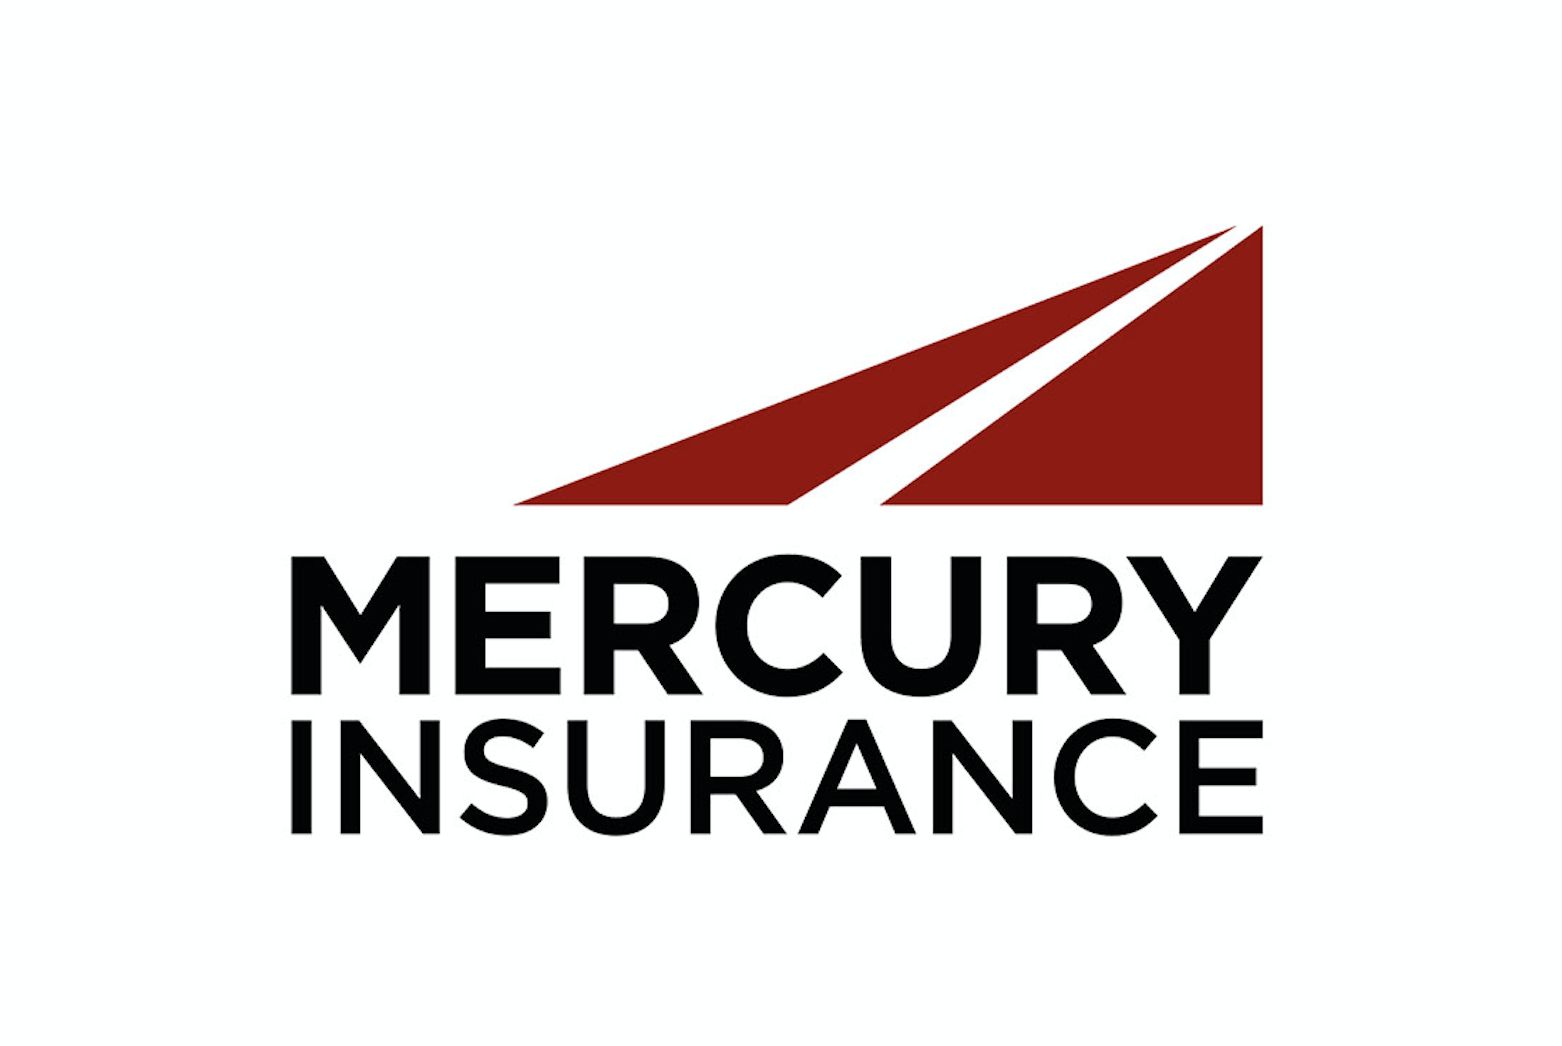 How do you get a mercury car insurance quote online?